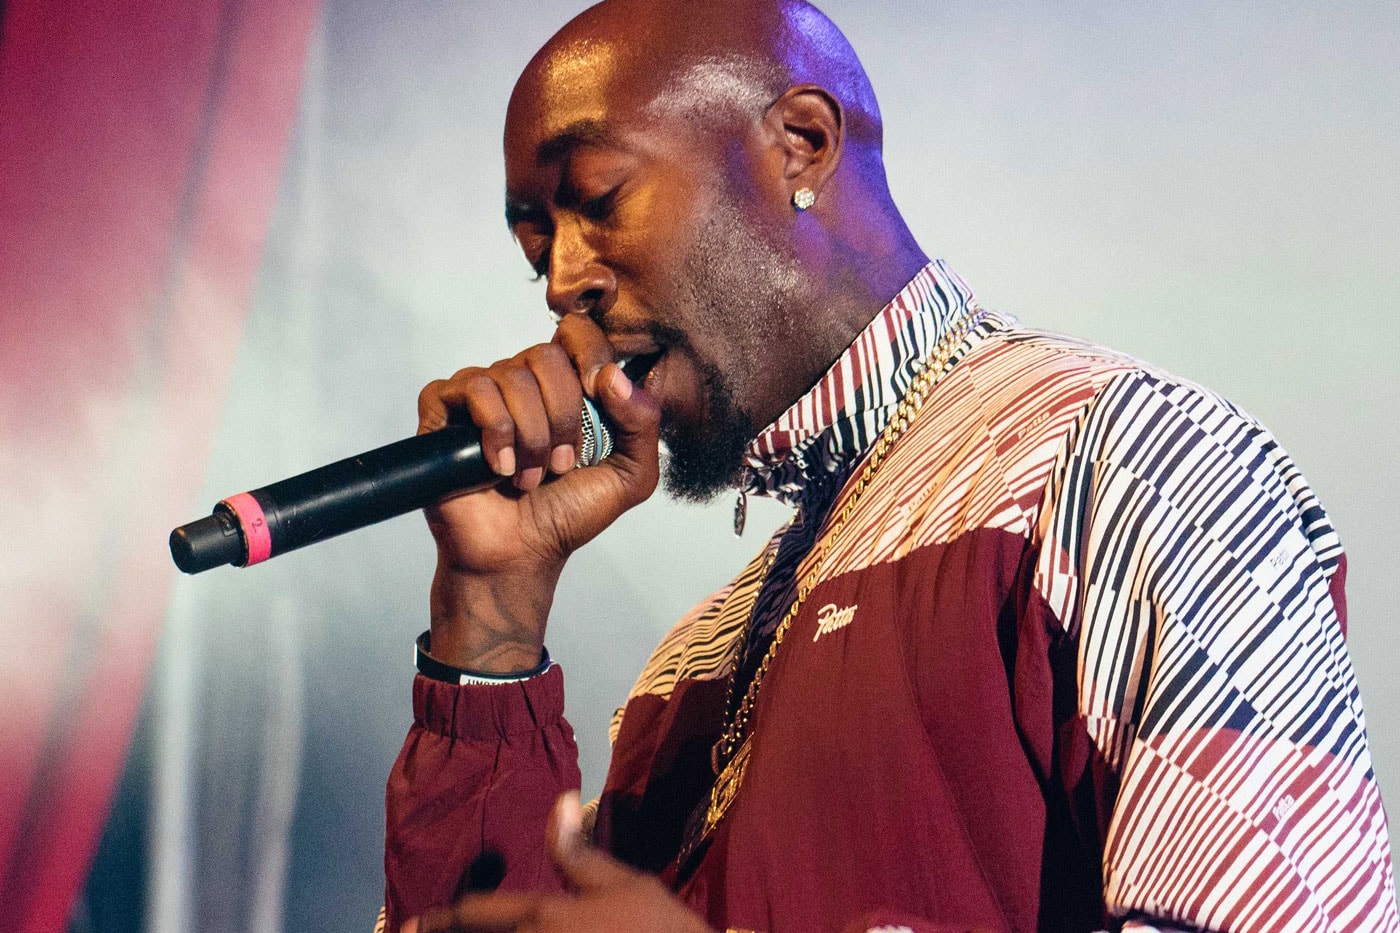 Freddie Gibbs Announces New Project, Shares "F*ckin' Up The Count"